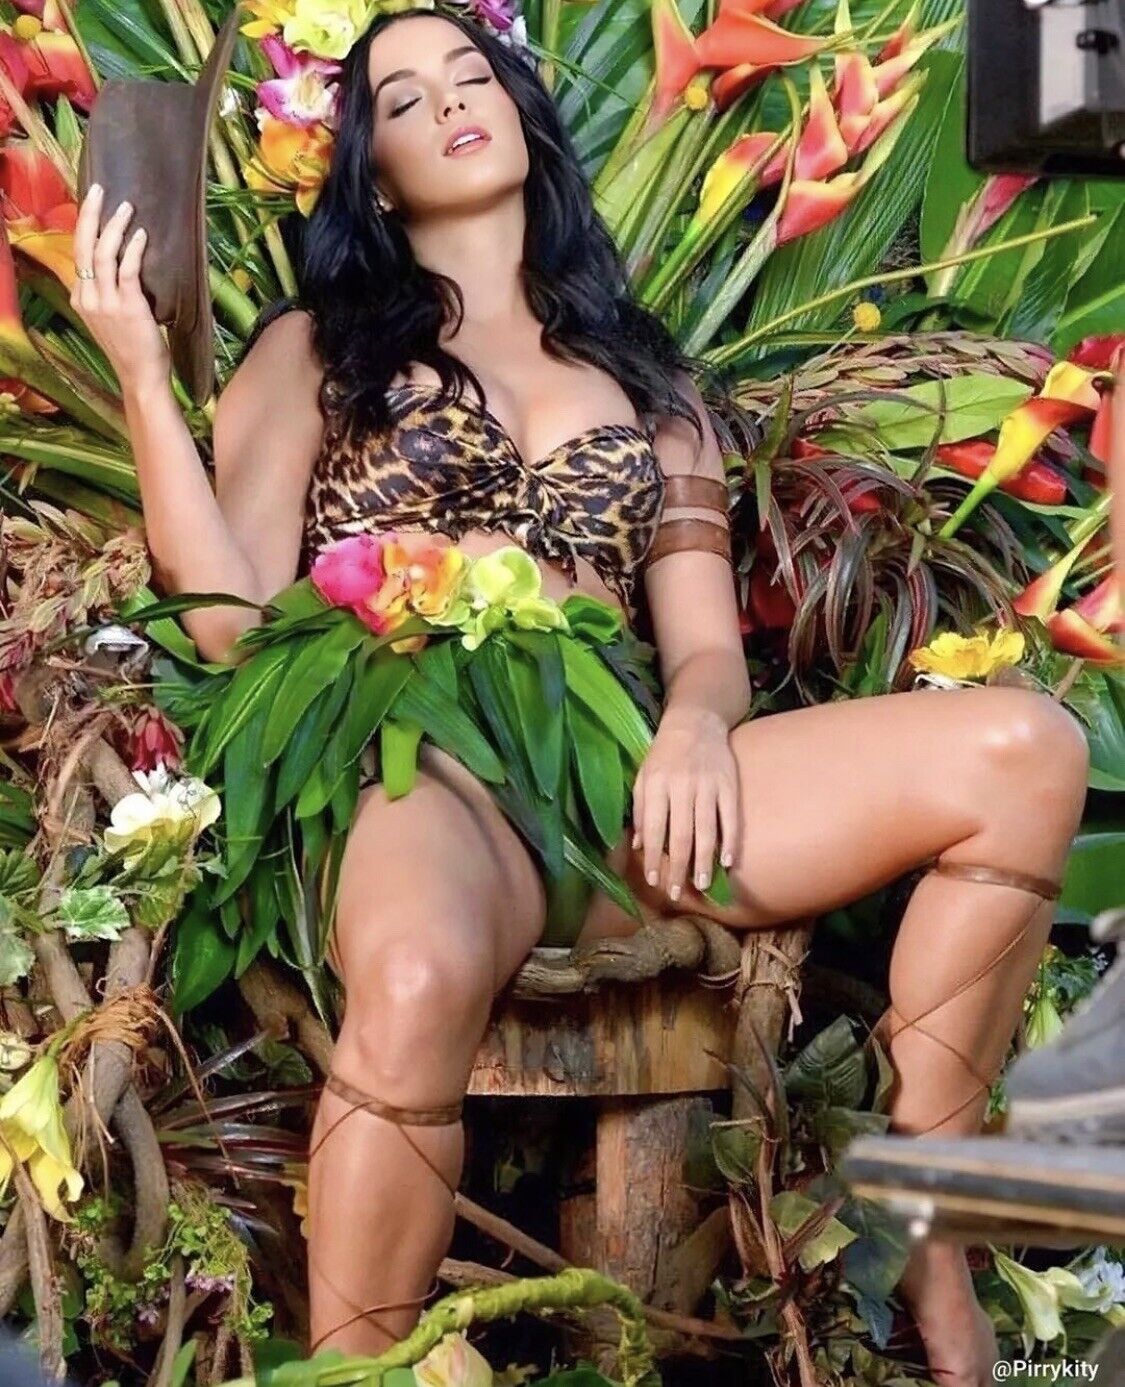 KATY PERRY - TRULY RELAXING 